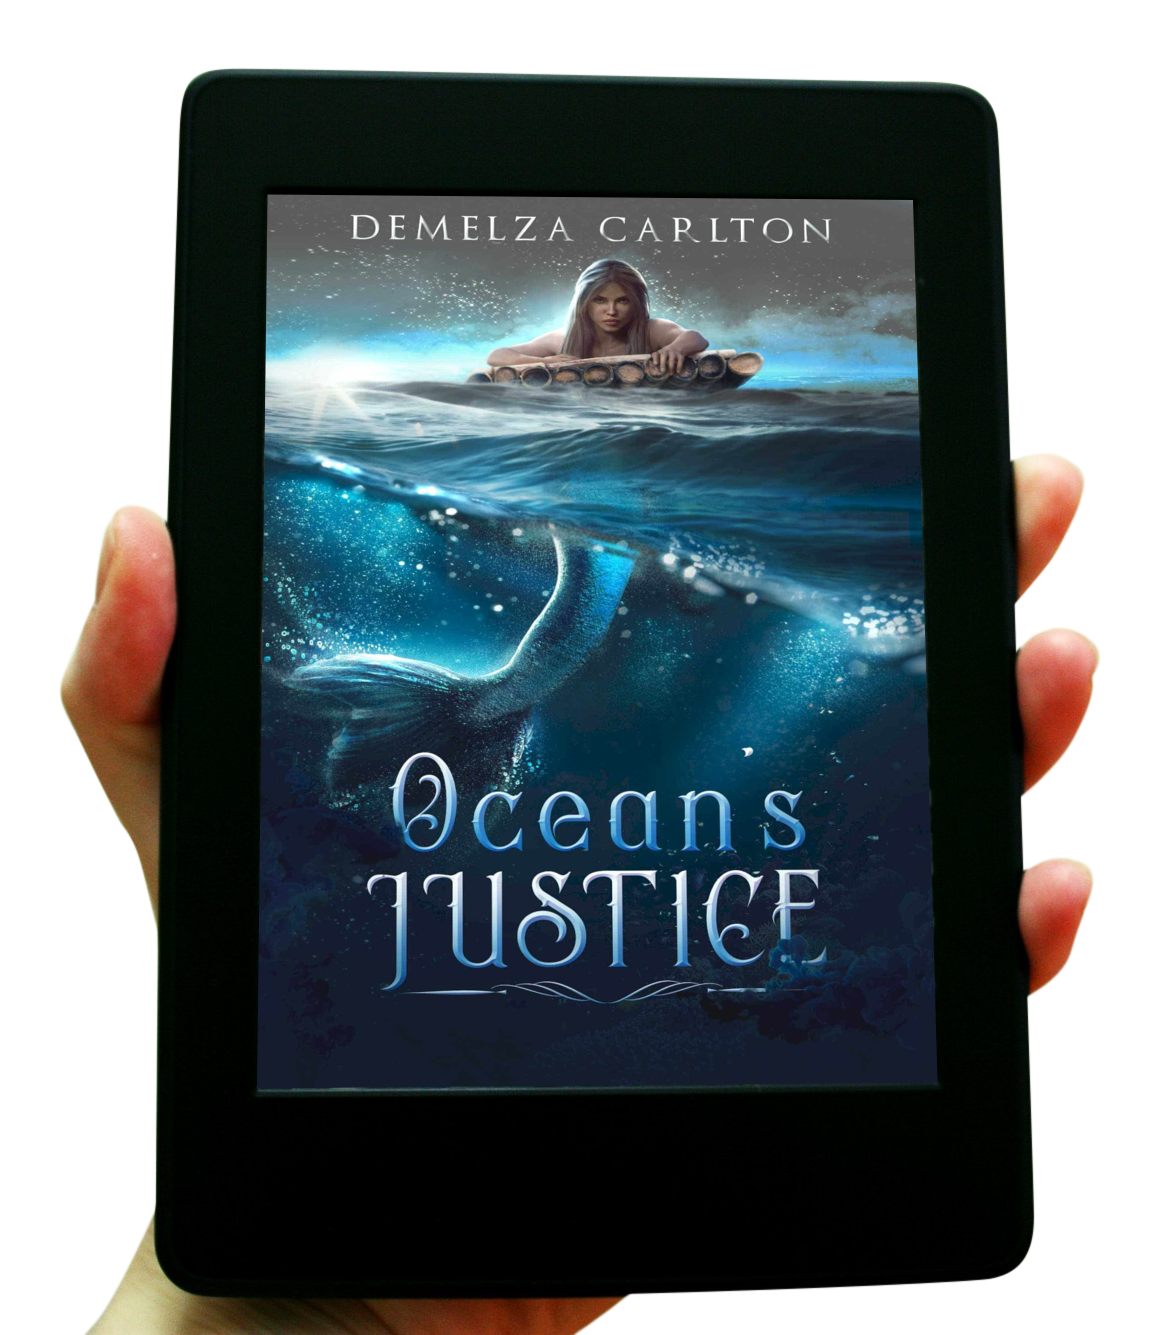 Ocean's Justice Book 1 in the Siren of War series by USA Today Bestselling Author Demelza Carlton ebook